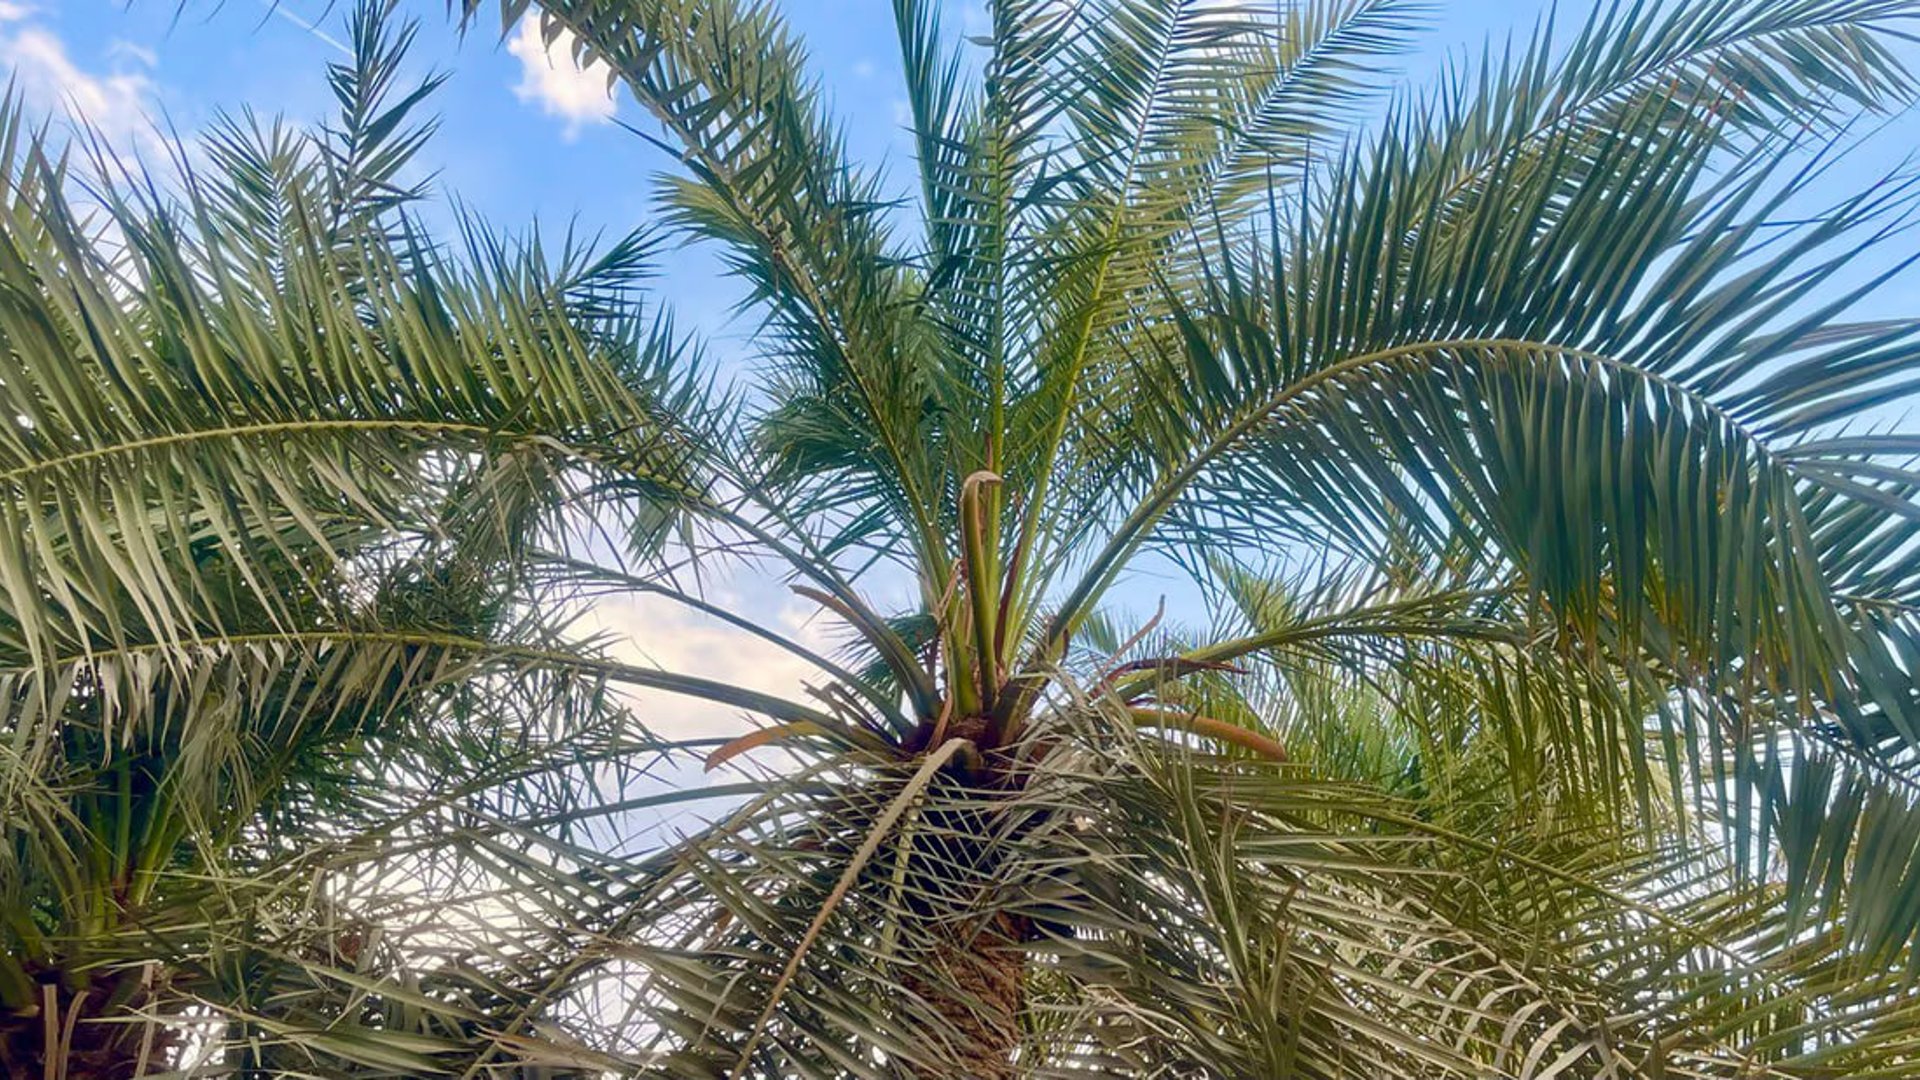 Early blossoms in Basra palms raise hopes for fruitful season water supply remains key